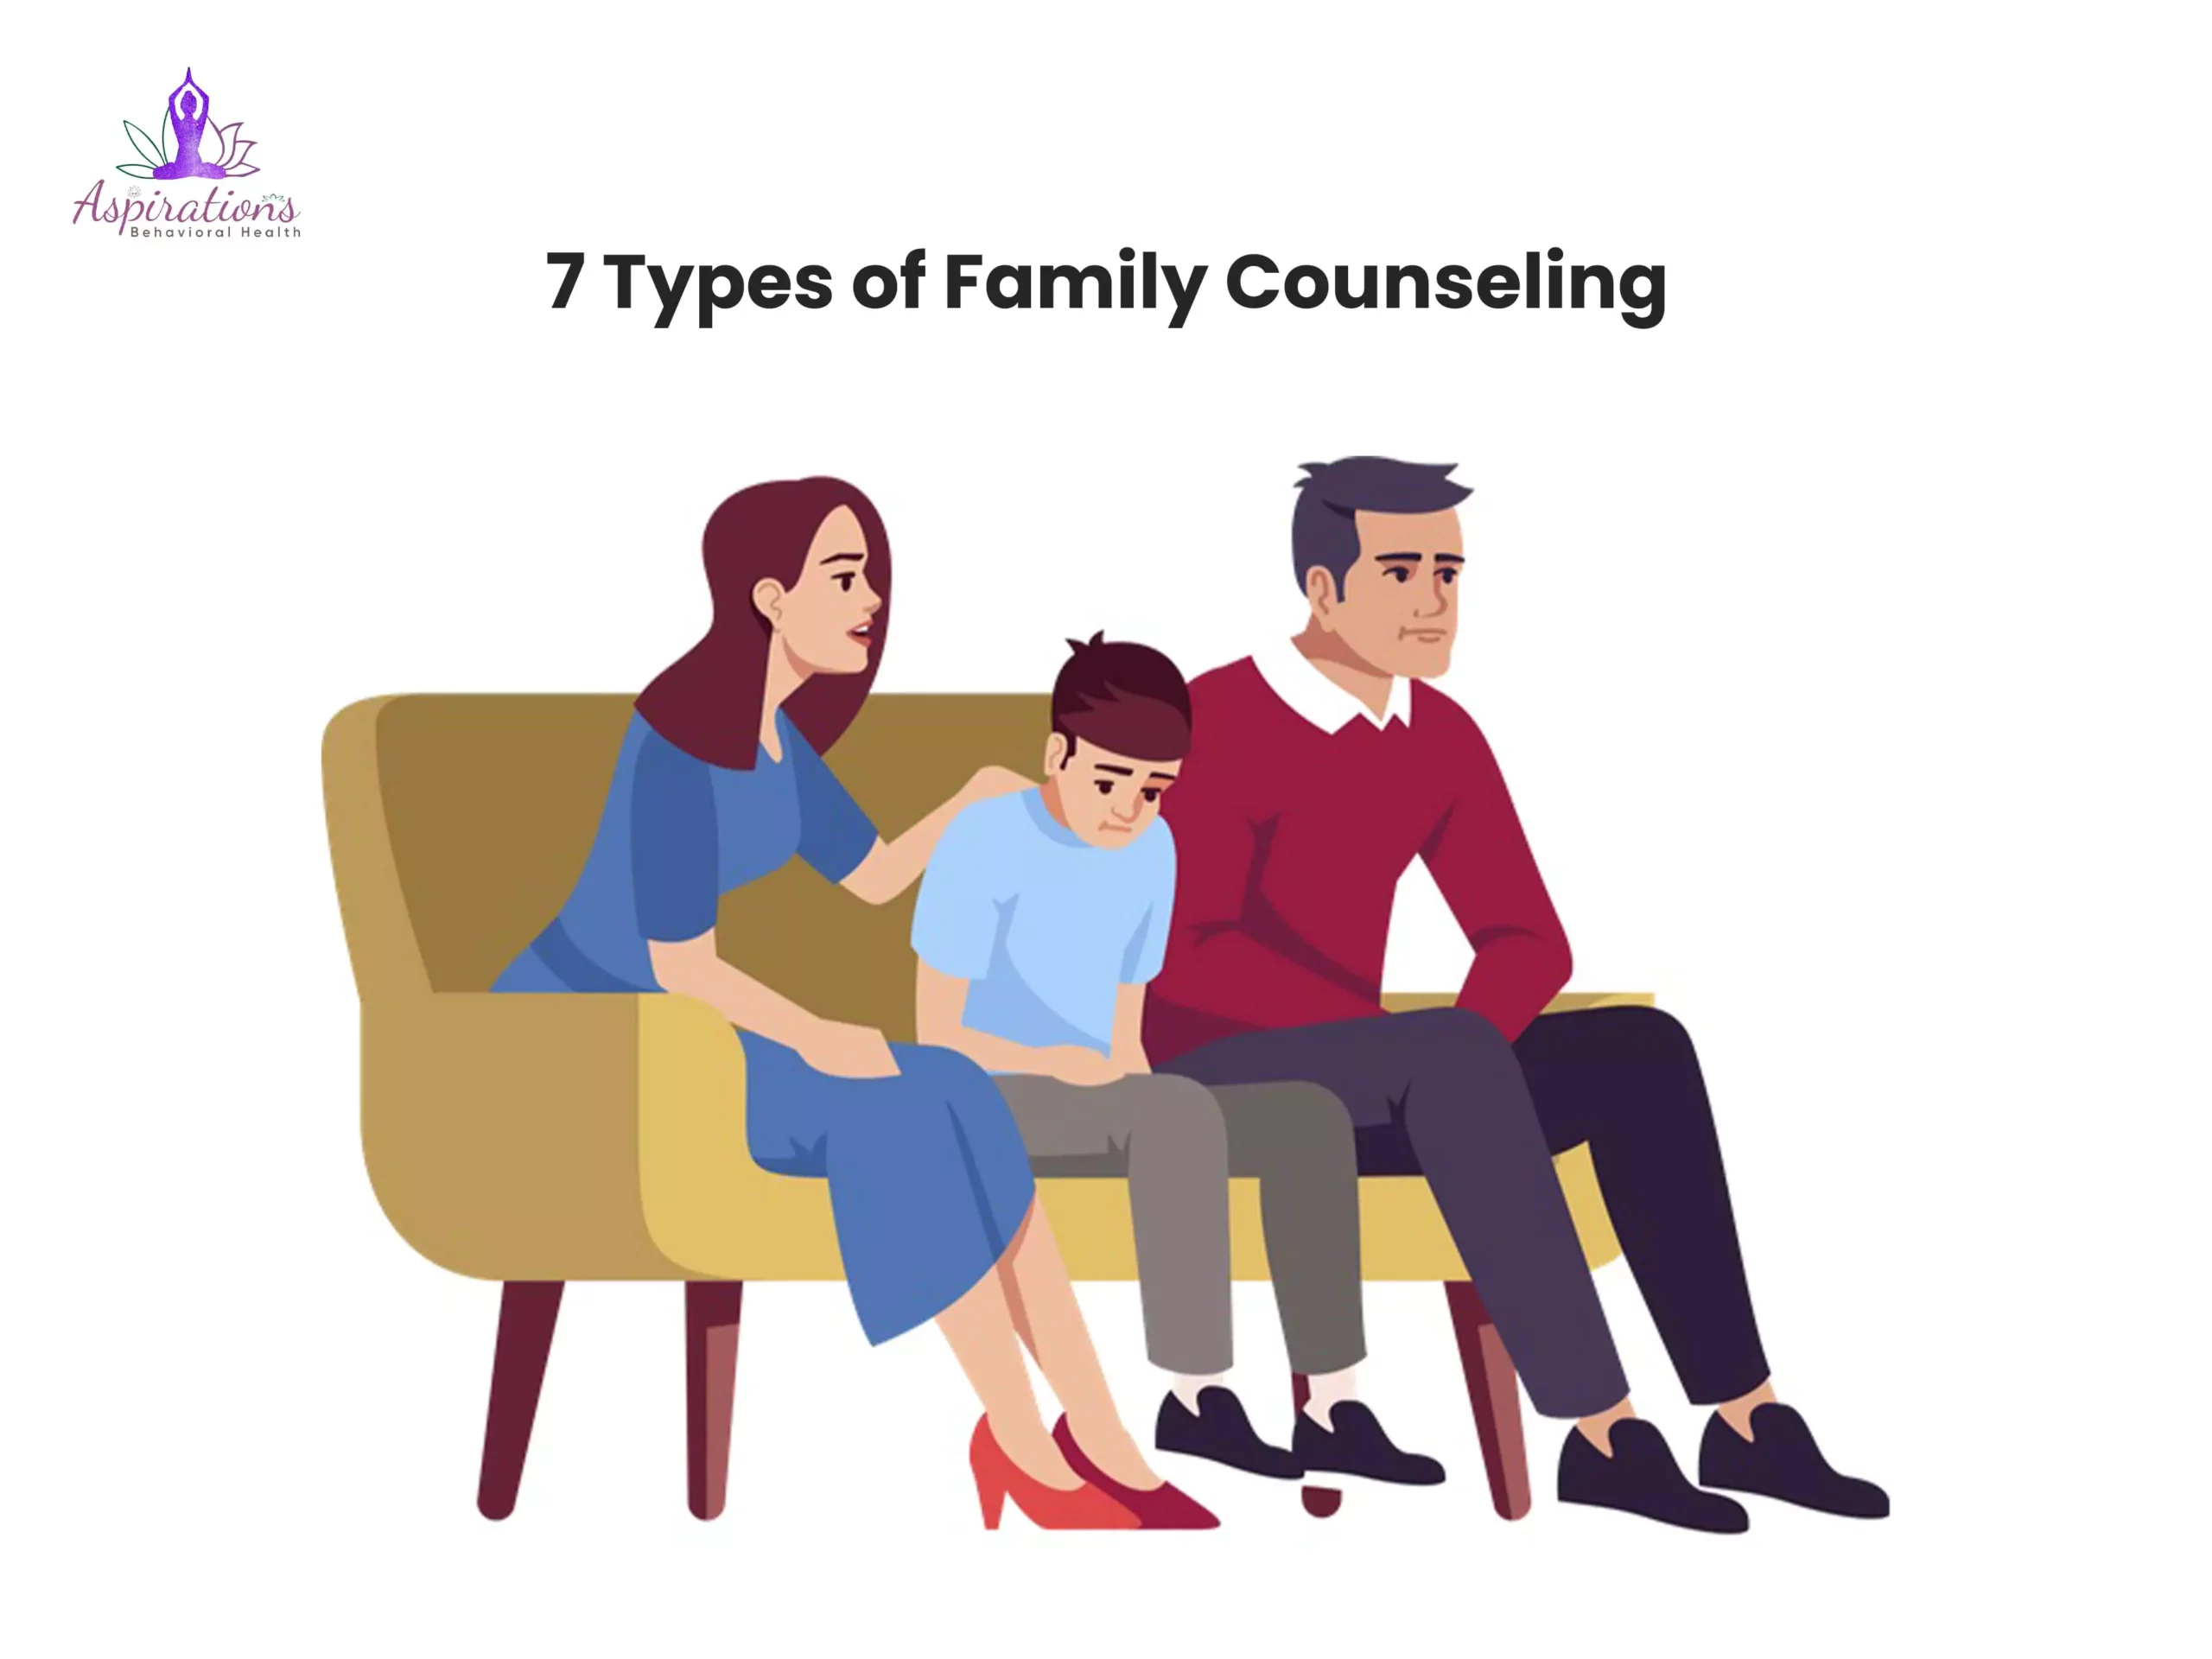 7 Types of Family Counseling